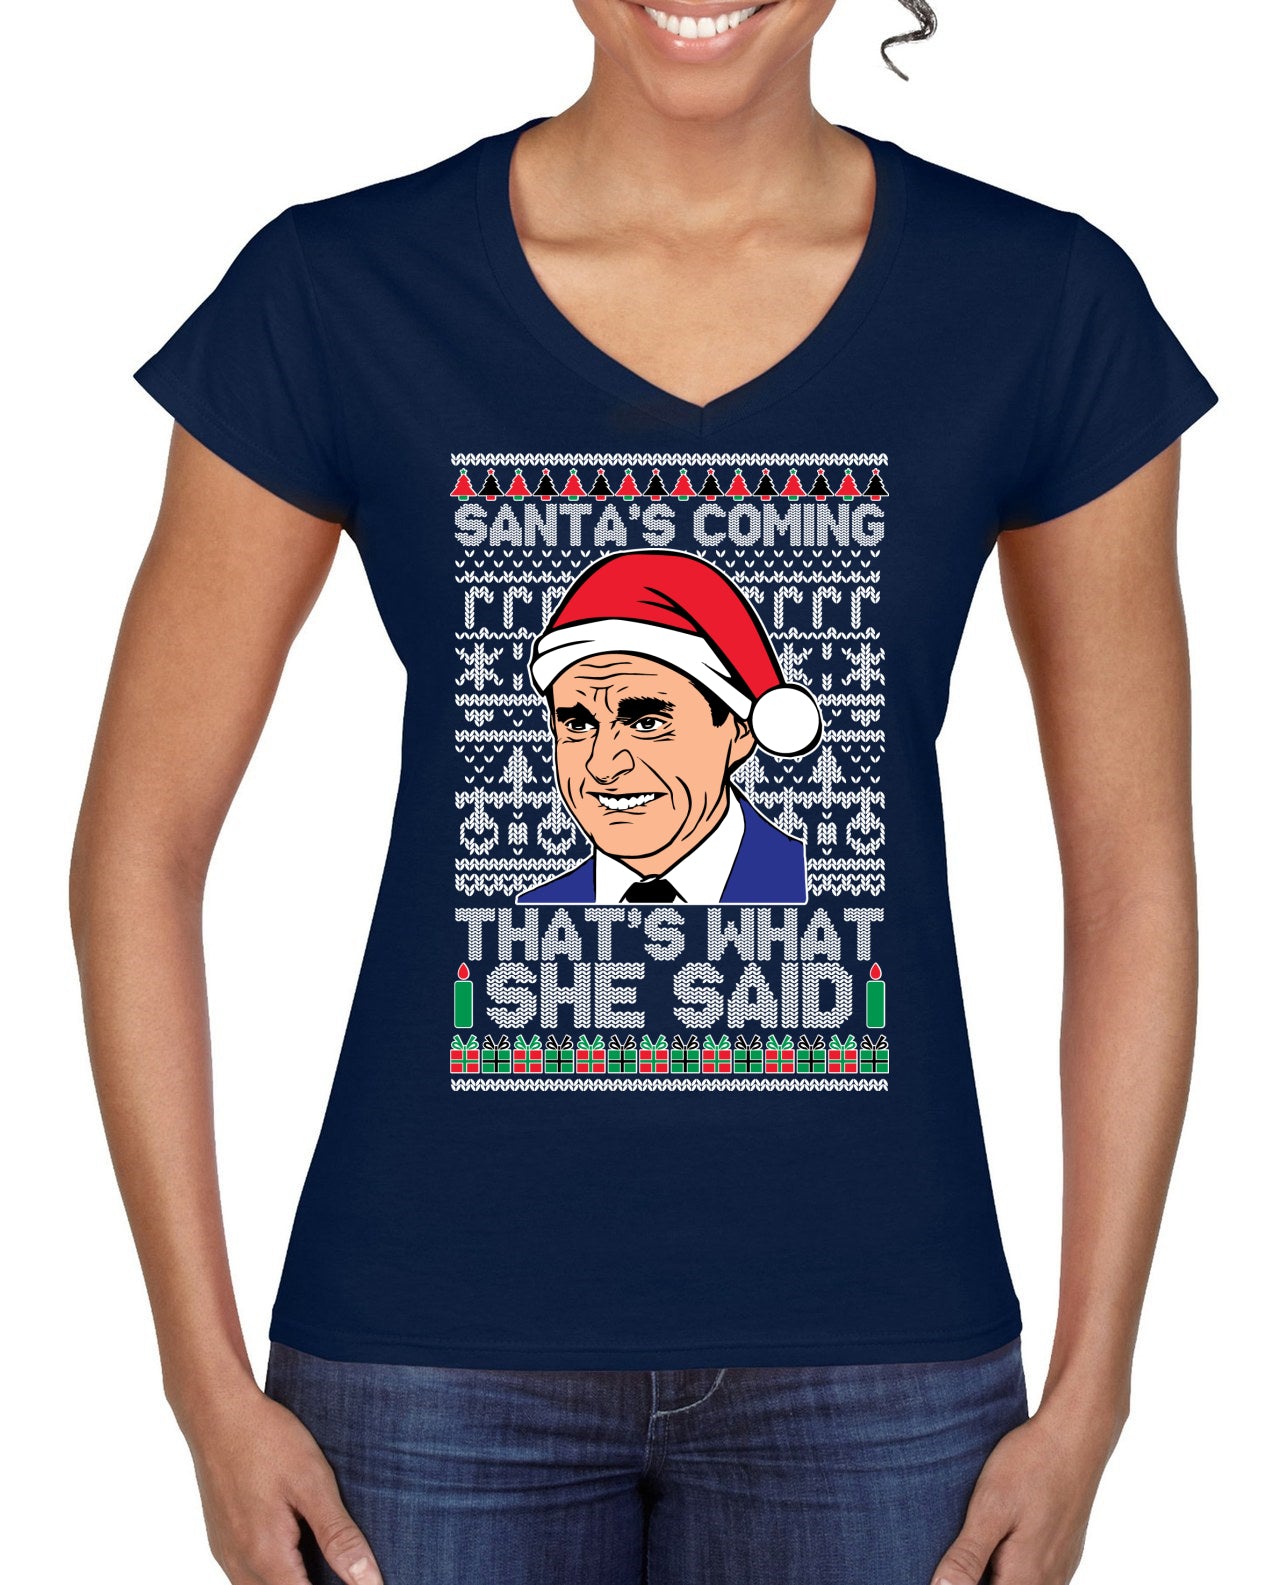 Santas Coming That's What She Said Michael Scott Ugly Christmas Sweater Women’s Standard V-Neck Tee